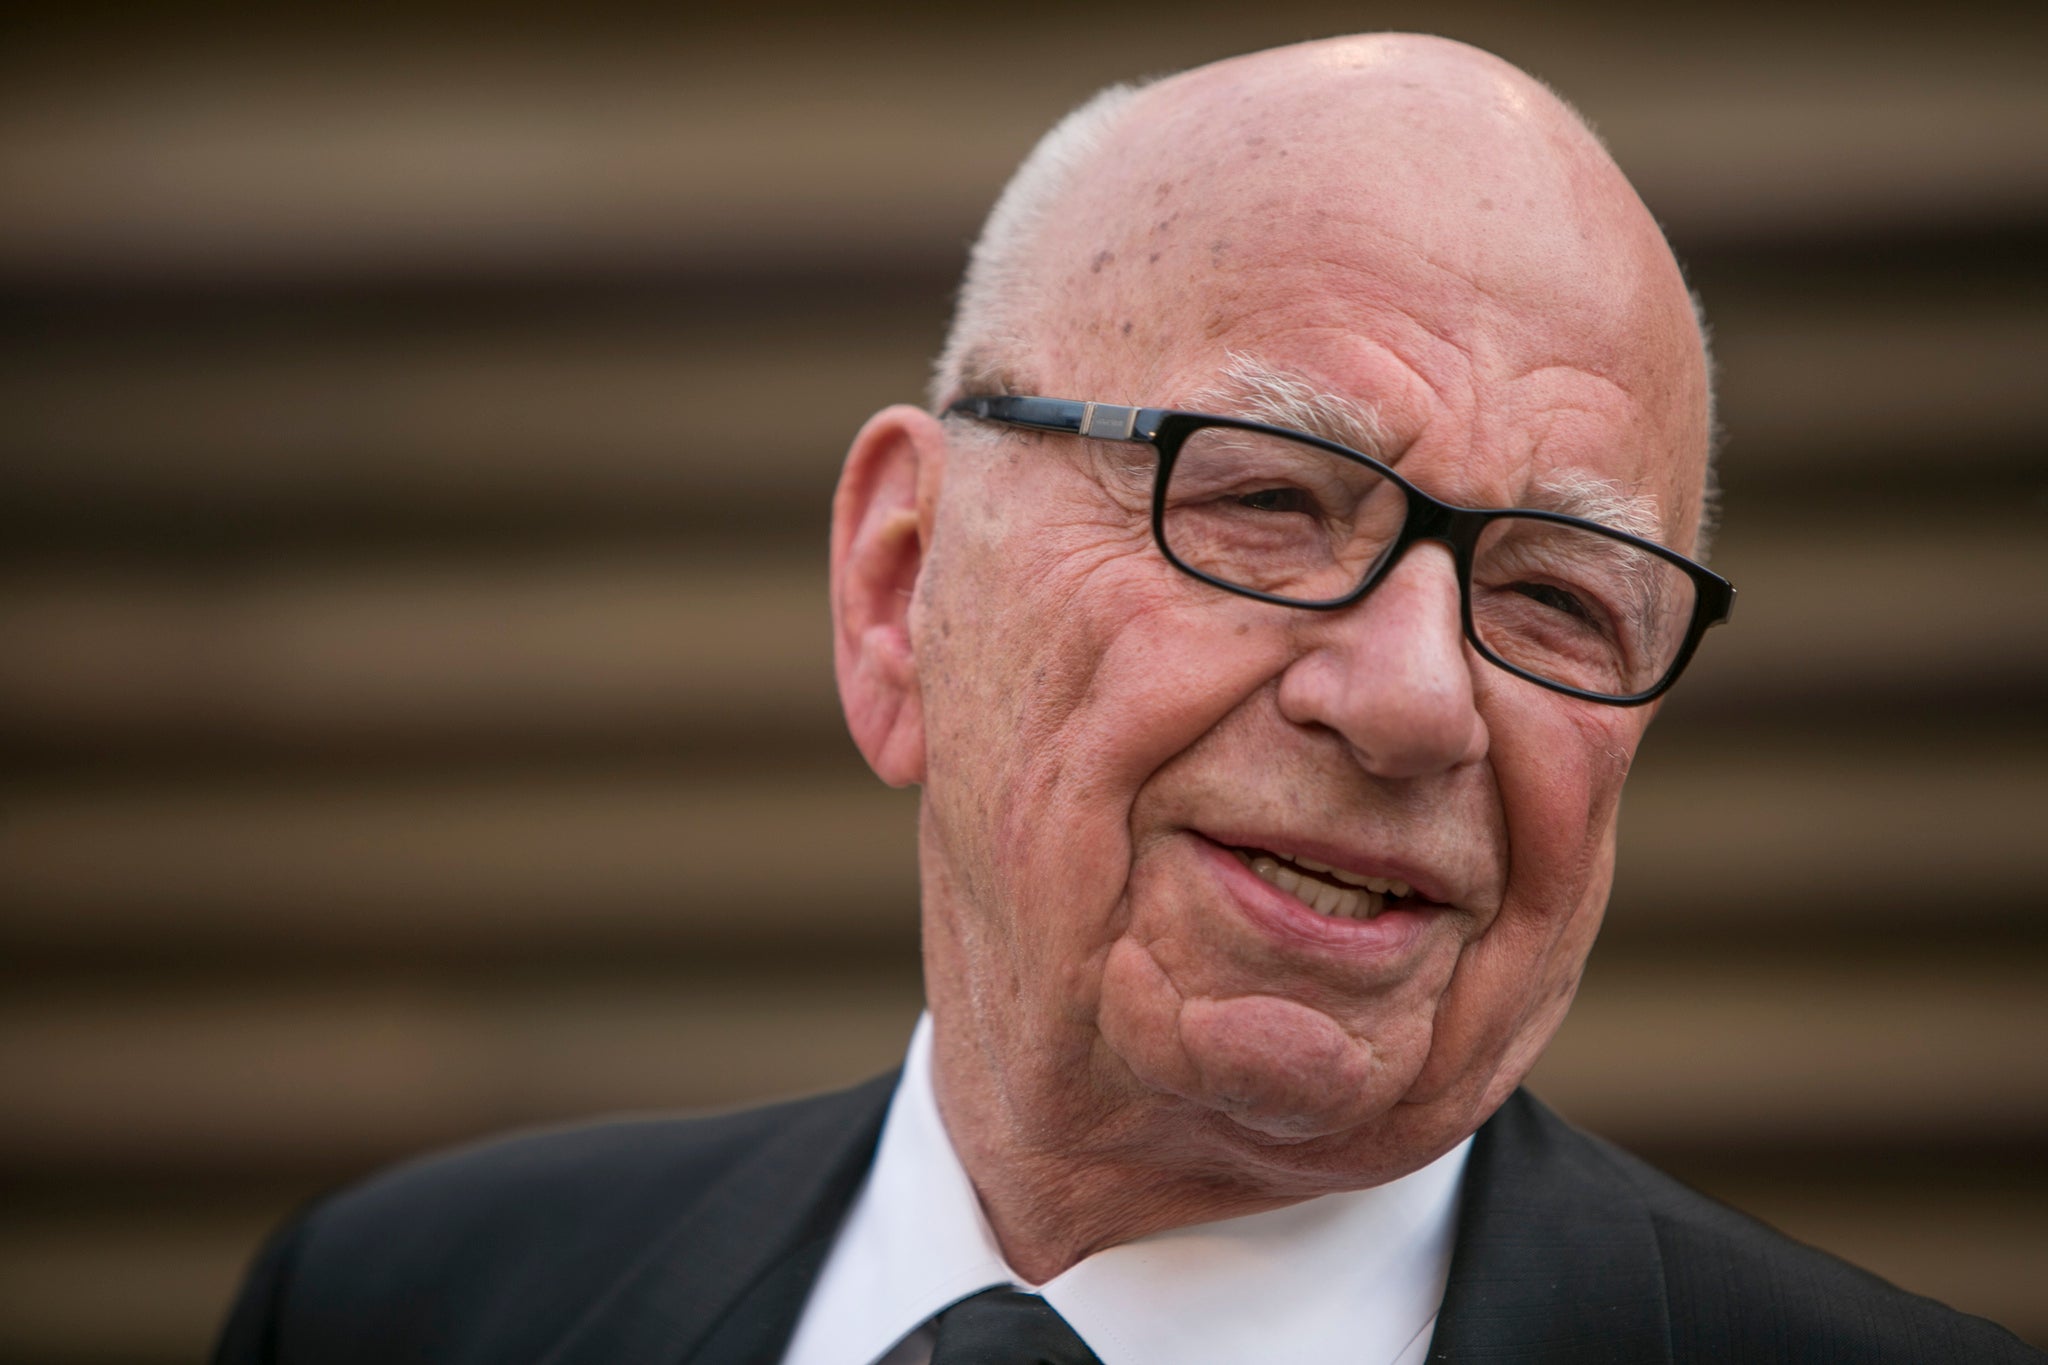 Rupert Murdoch, 83, has built his global media empire over the decades through a series of rapacious takeovers